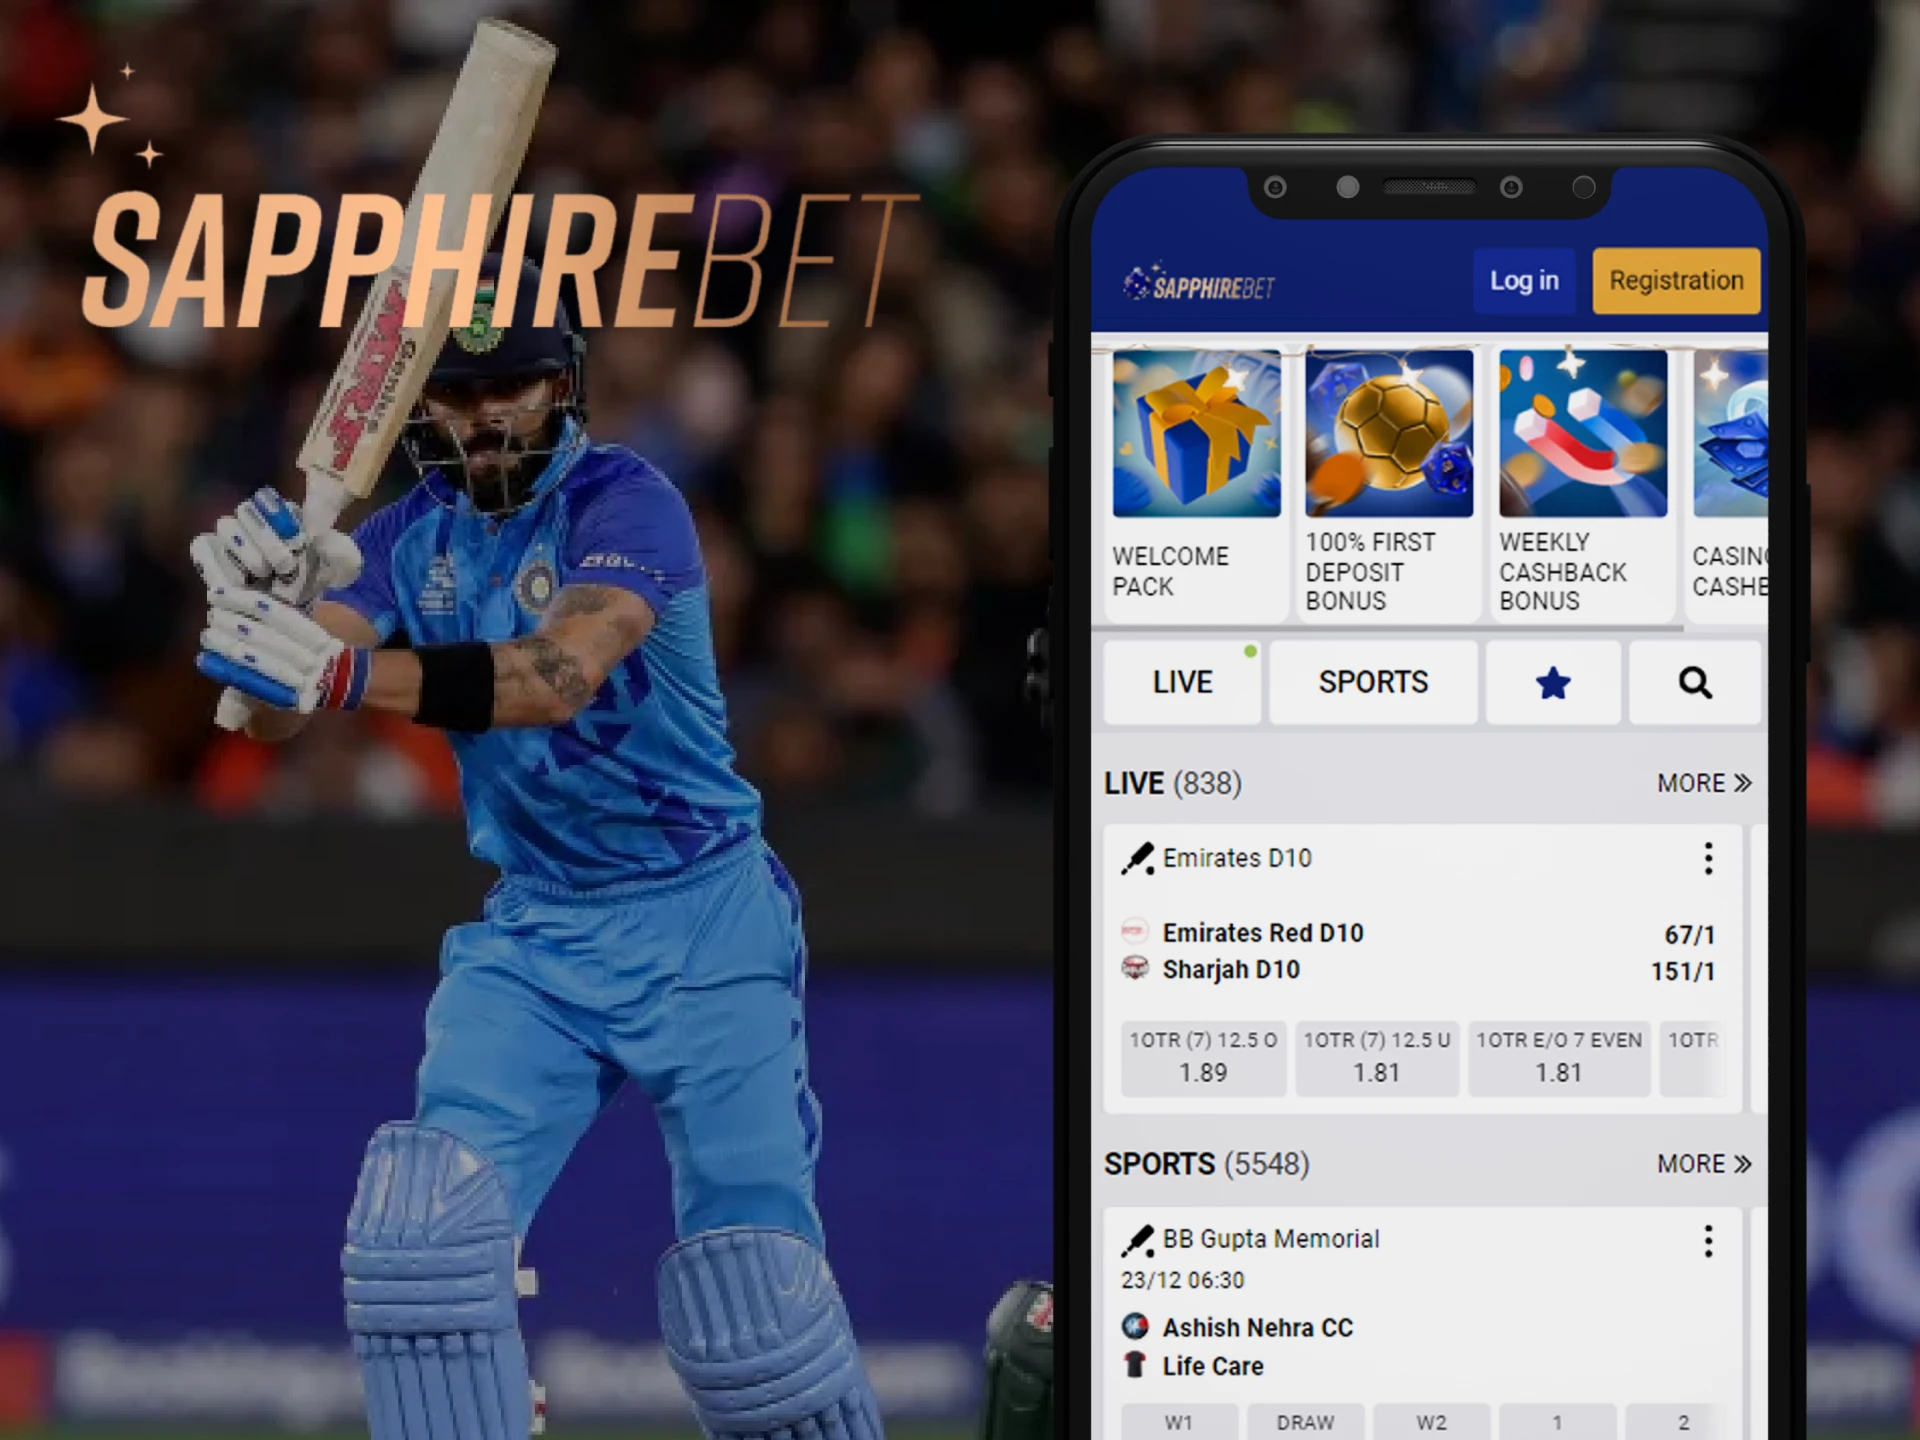 The Sapphirebet app offers a wide selection of sports disciplines.